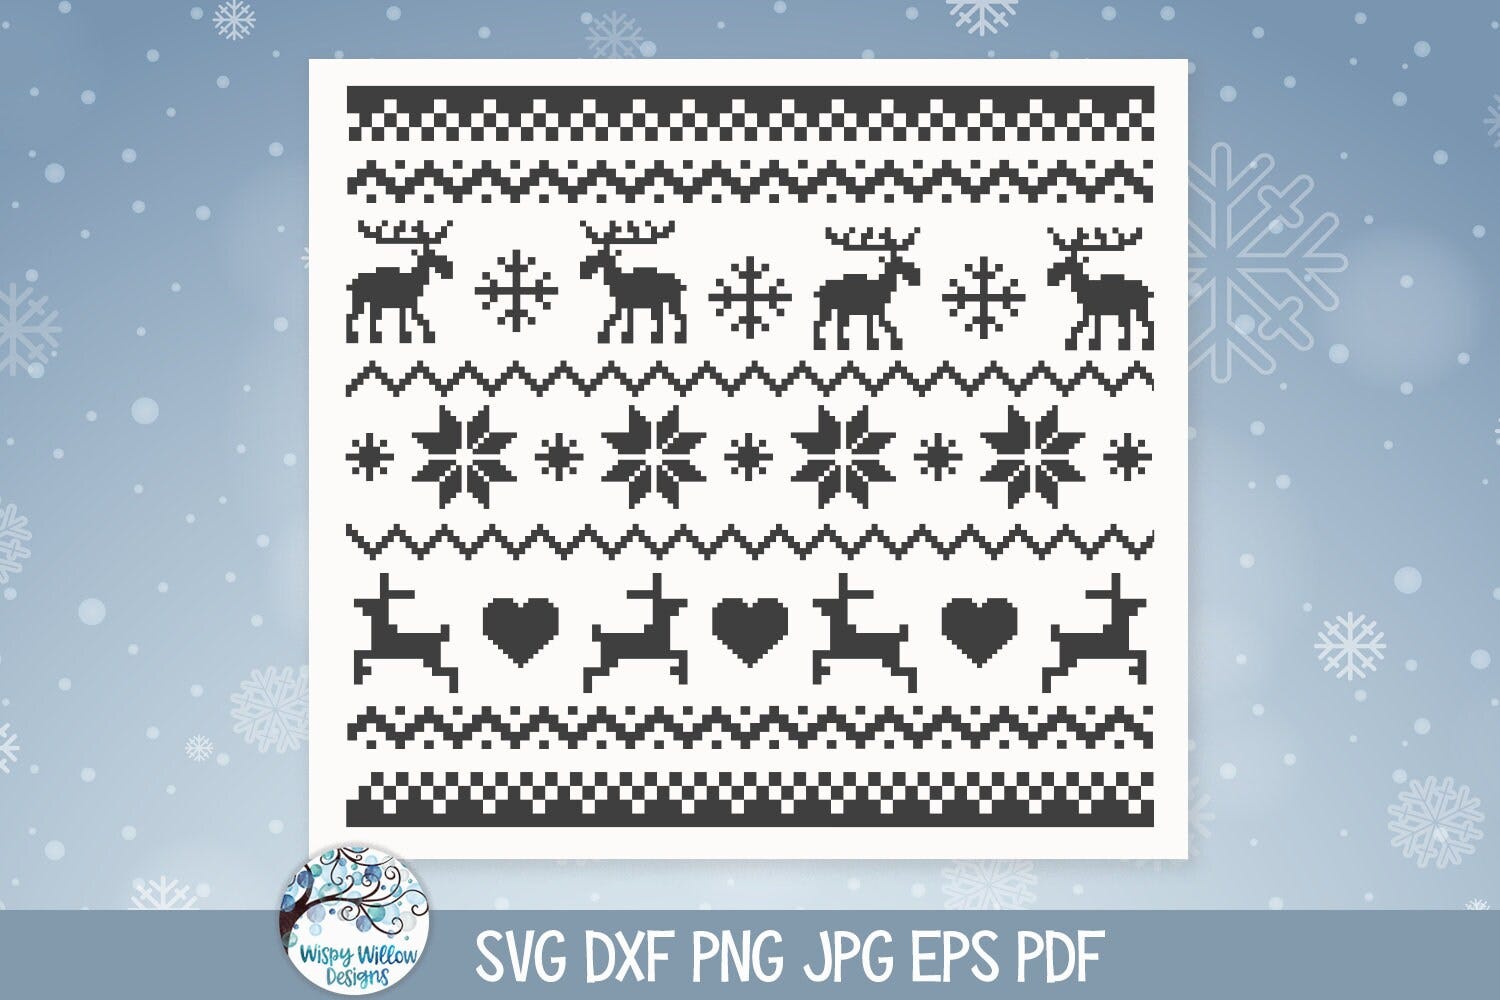 Ugly Sweater Pattern SVG for Cricut, Sweater Knit Pattern PNG, Christmas Shirt Design, Holiday Winter Sweater, Vinyl Decal Cut File Download